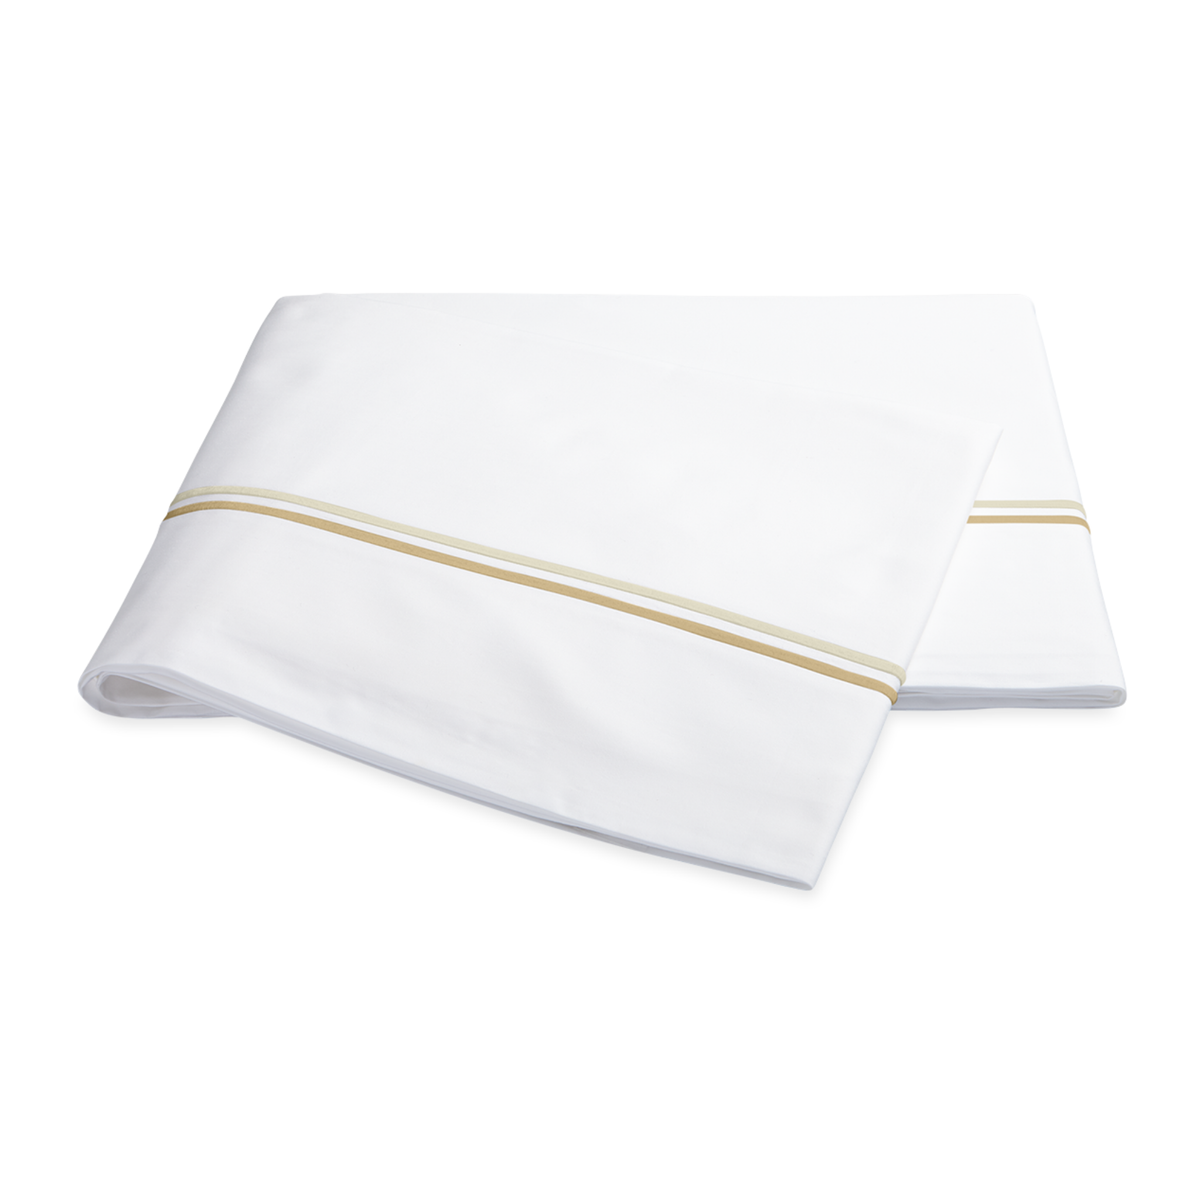 Flat Sheet of Matouk Essex Bedding Collection in Champagne Color